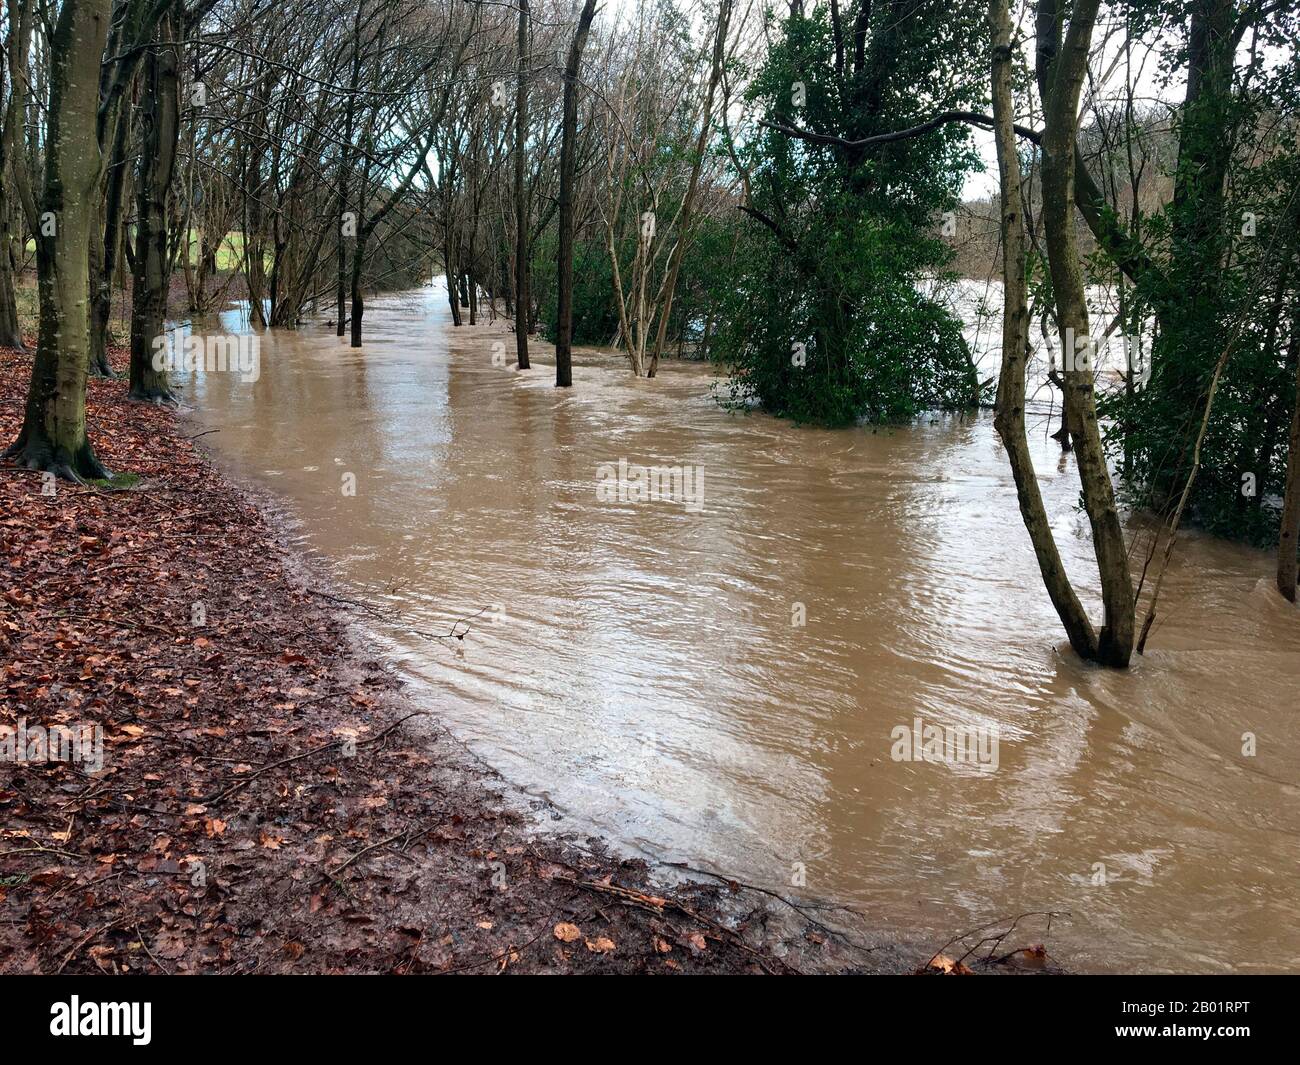 Flooded woodland footpath River Wye at Hay on Wye the river reached it's highest level of 5.05 metres recorded on the local river height gauge Stock Photo